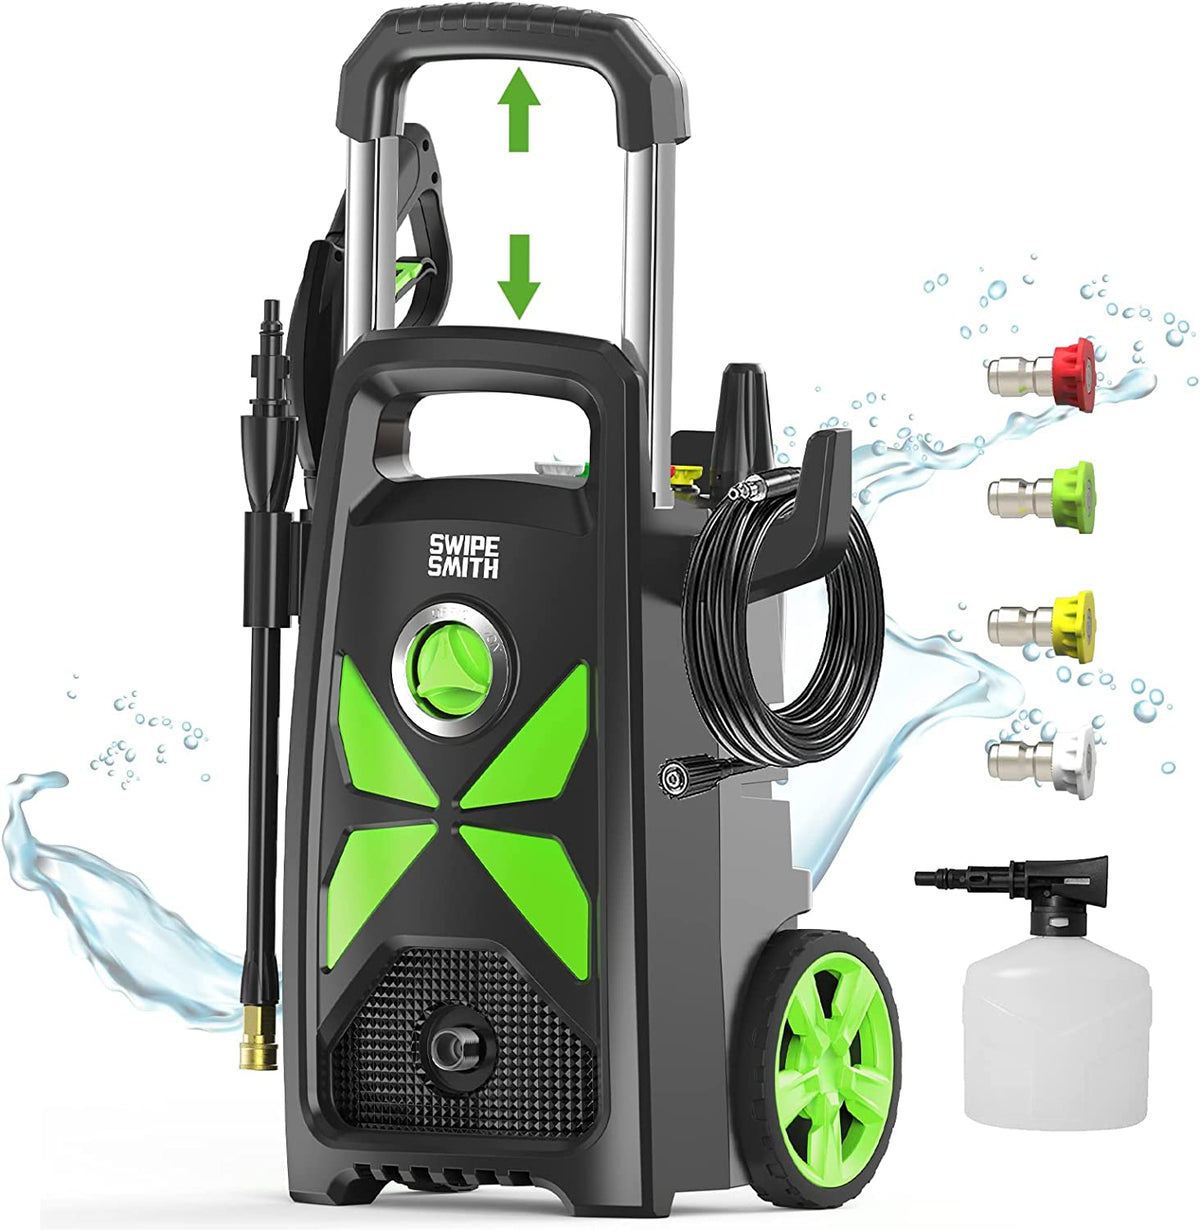 Cyber Monday SWIPESMITH Electric Pressure Washer, 2500 Max PSI 2.4 GPM Power Washer with Telescopic Handle